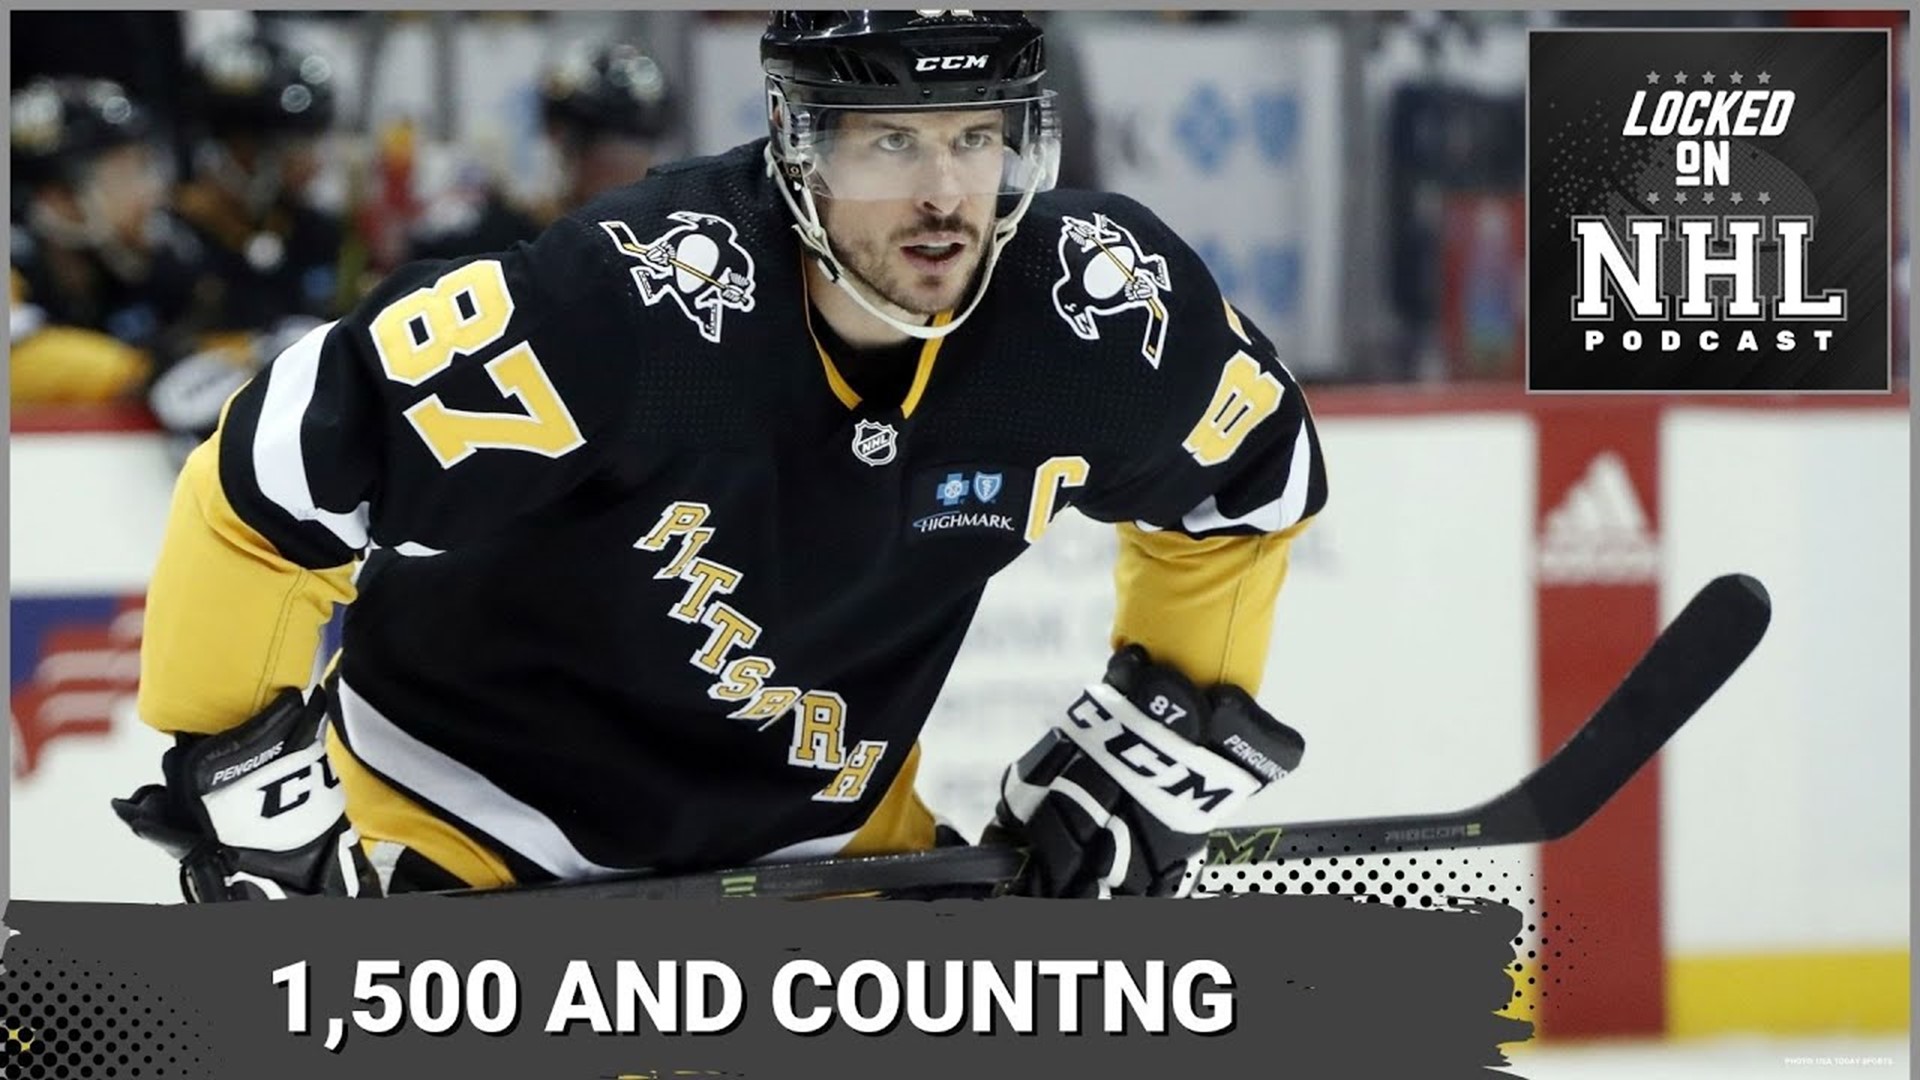 Sidney Crosby Reached 1,500 Career Points but Can He Lead the Pittsburgh Penguins to the Playoffs?